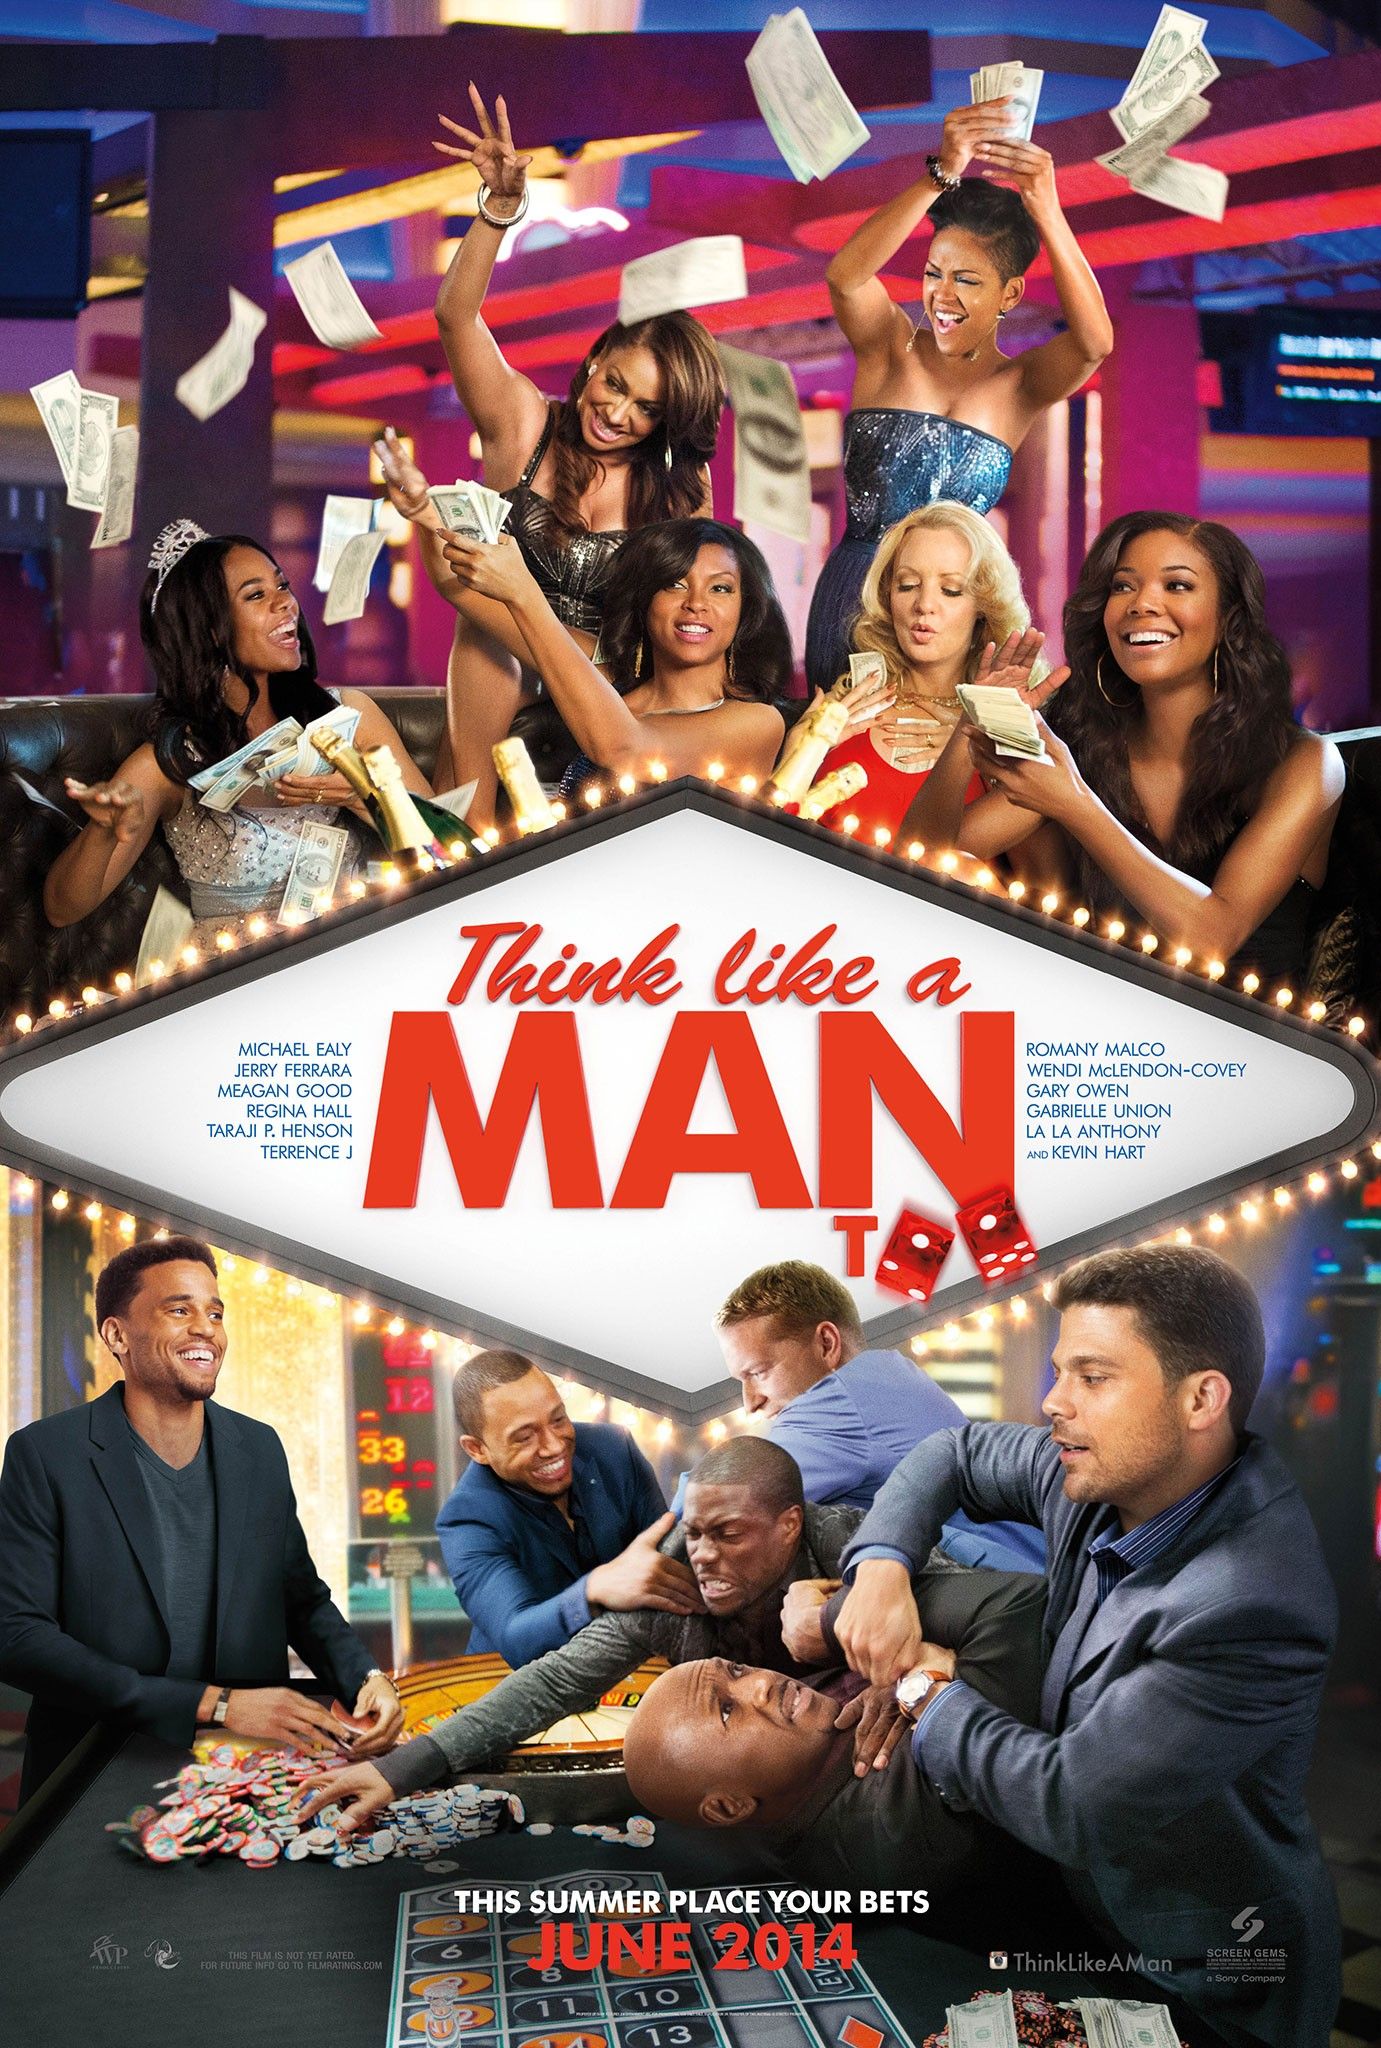 Think Like a Man Too hits theaters nationwide June 20th{69} added how she has become good friends with the rest of her female cast members.